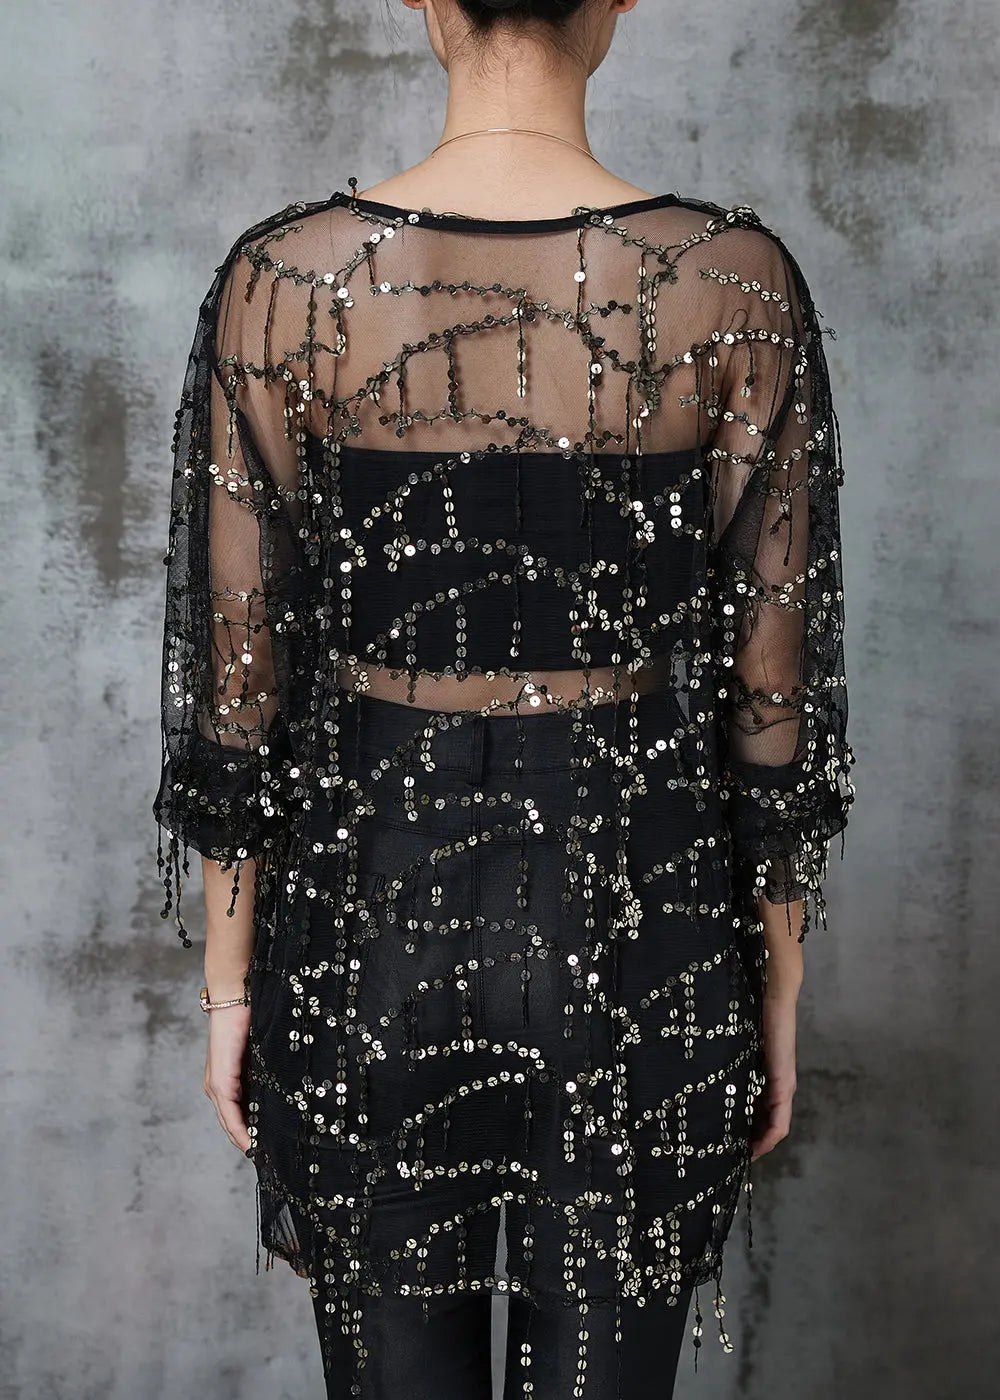 Classy Black Sequins Hollow Out Tulle Tops Summer Ada Fashion